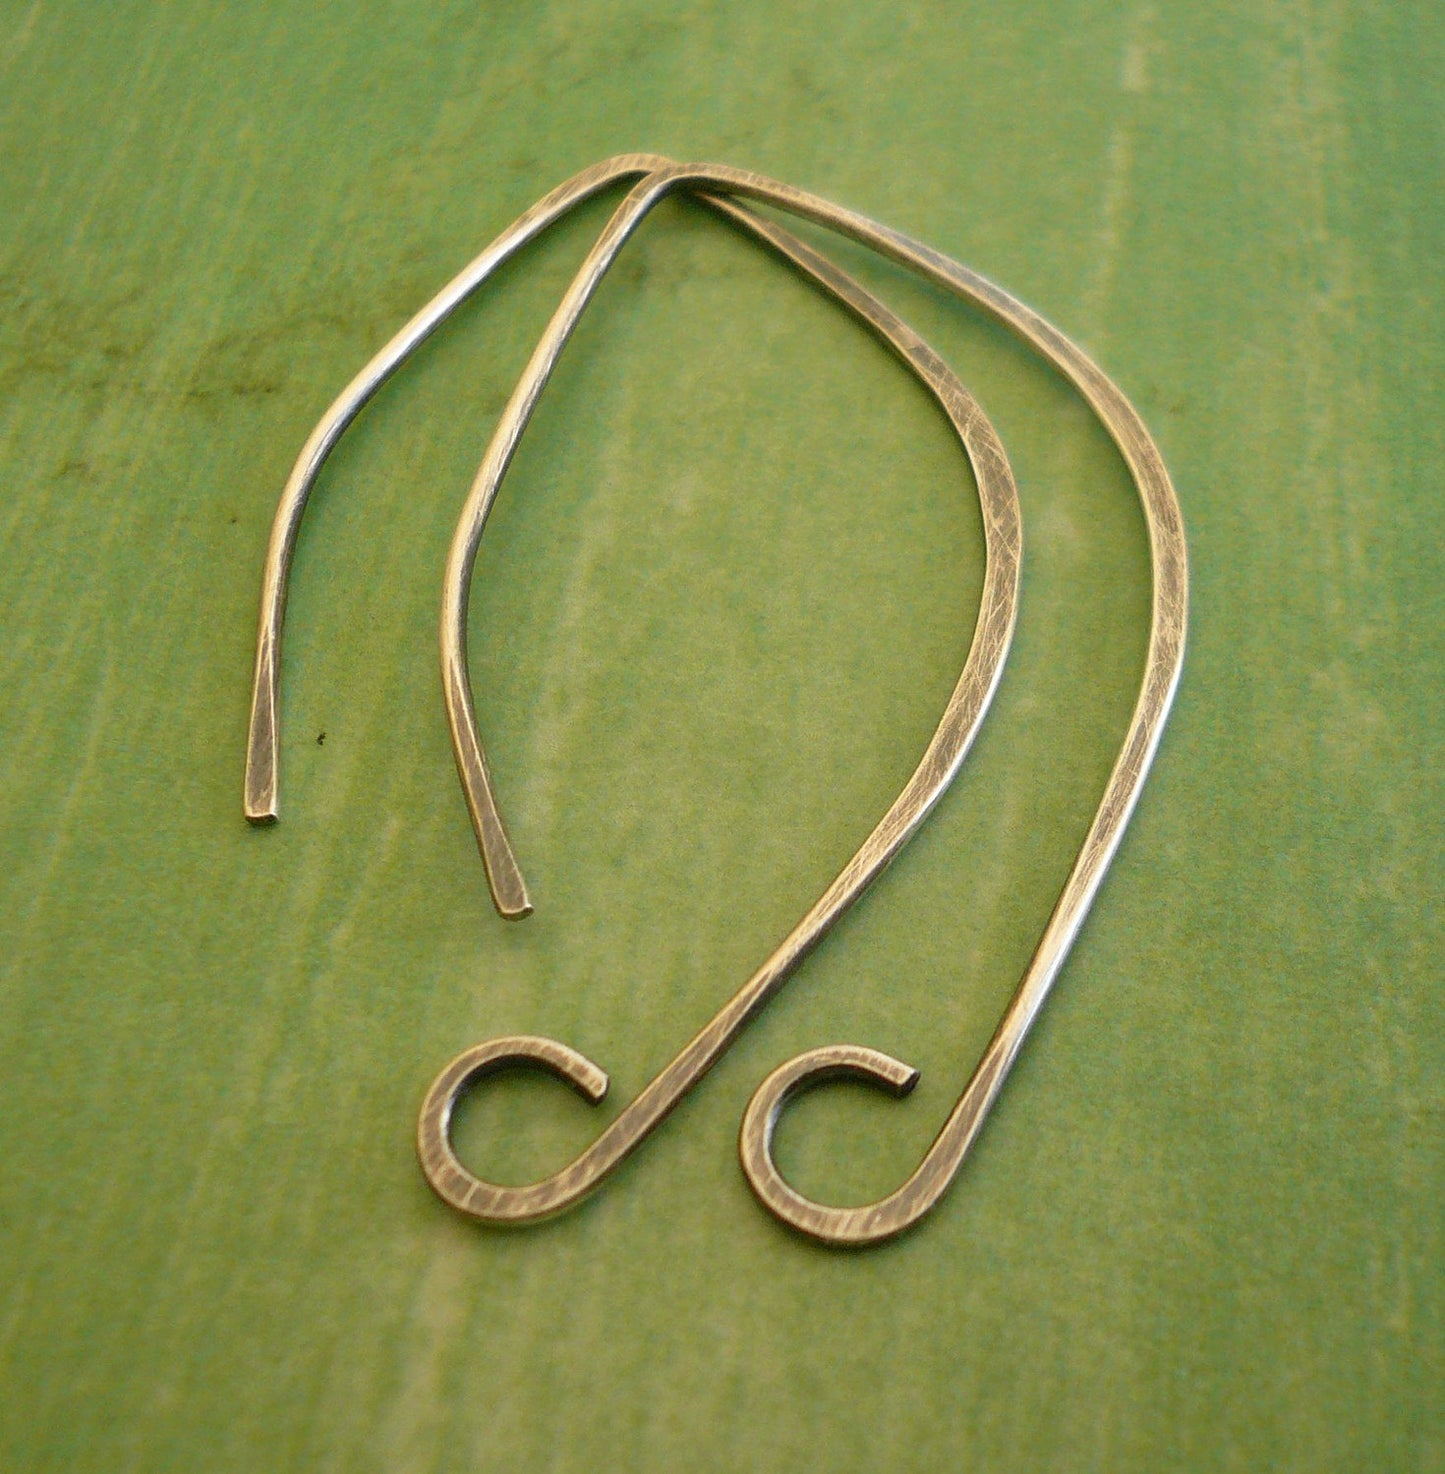 Hint Sterling Silver Earwires - Handmade. Handforged. Oxidized and polished